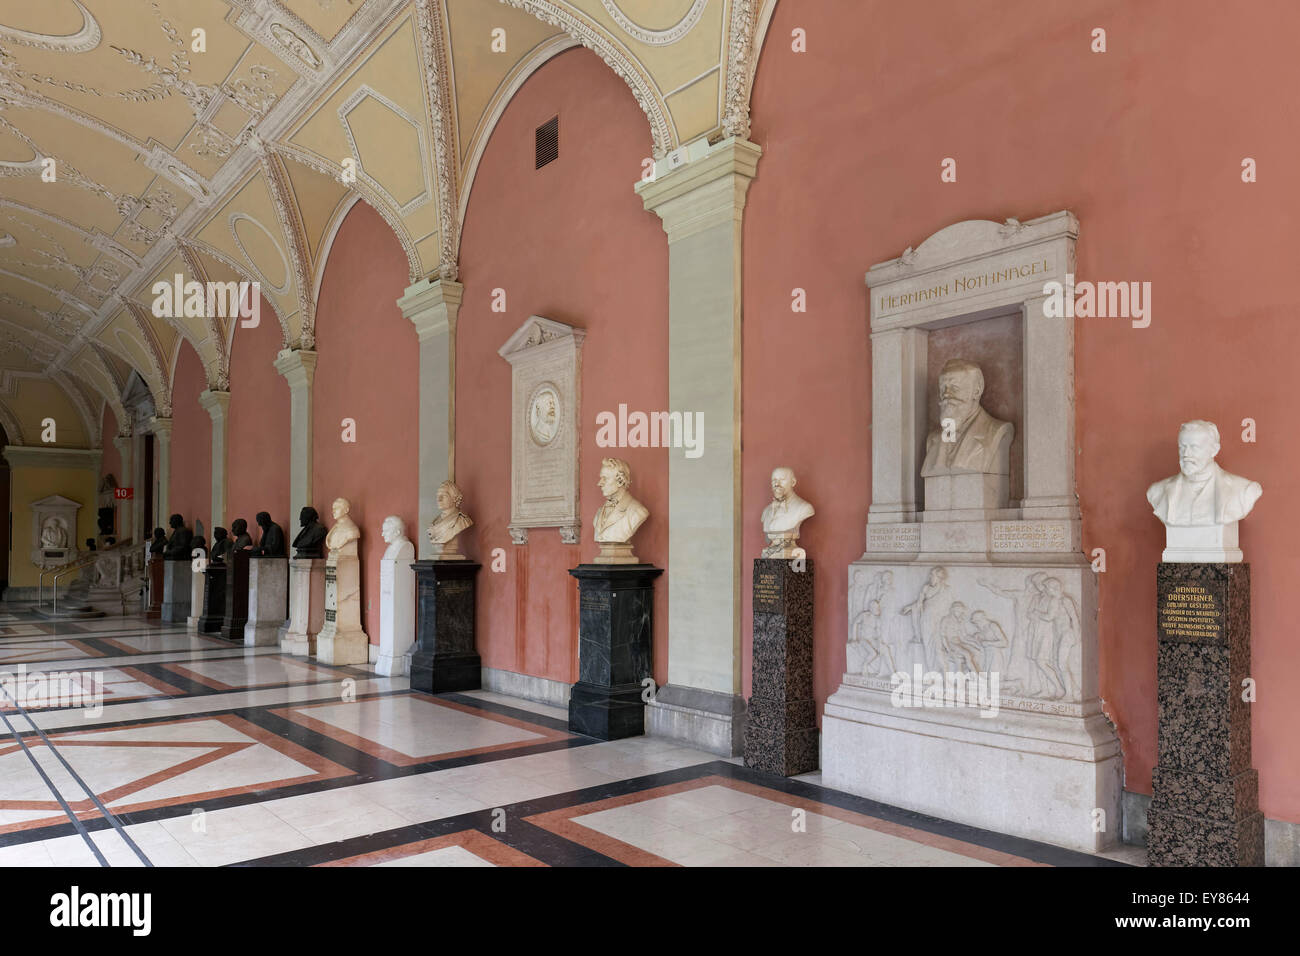 Arcades of the Vienna University, with busts and memorials of important scientists, Ringstraße, Vienna, Austria Stock Photo